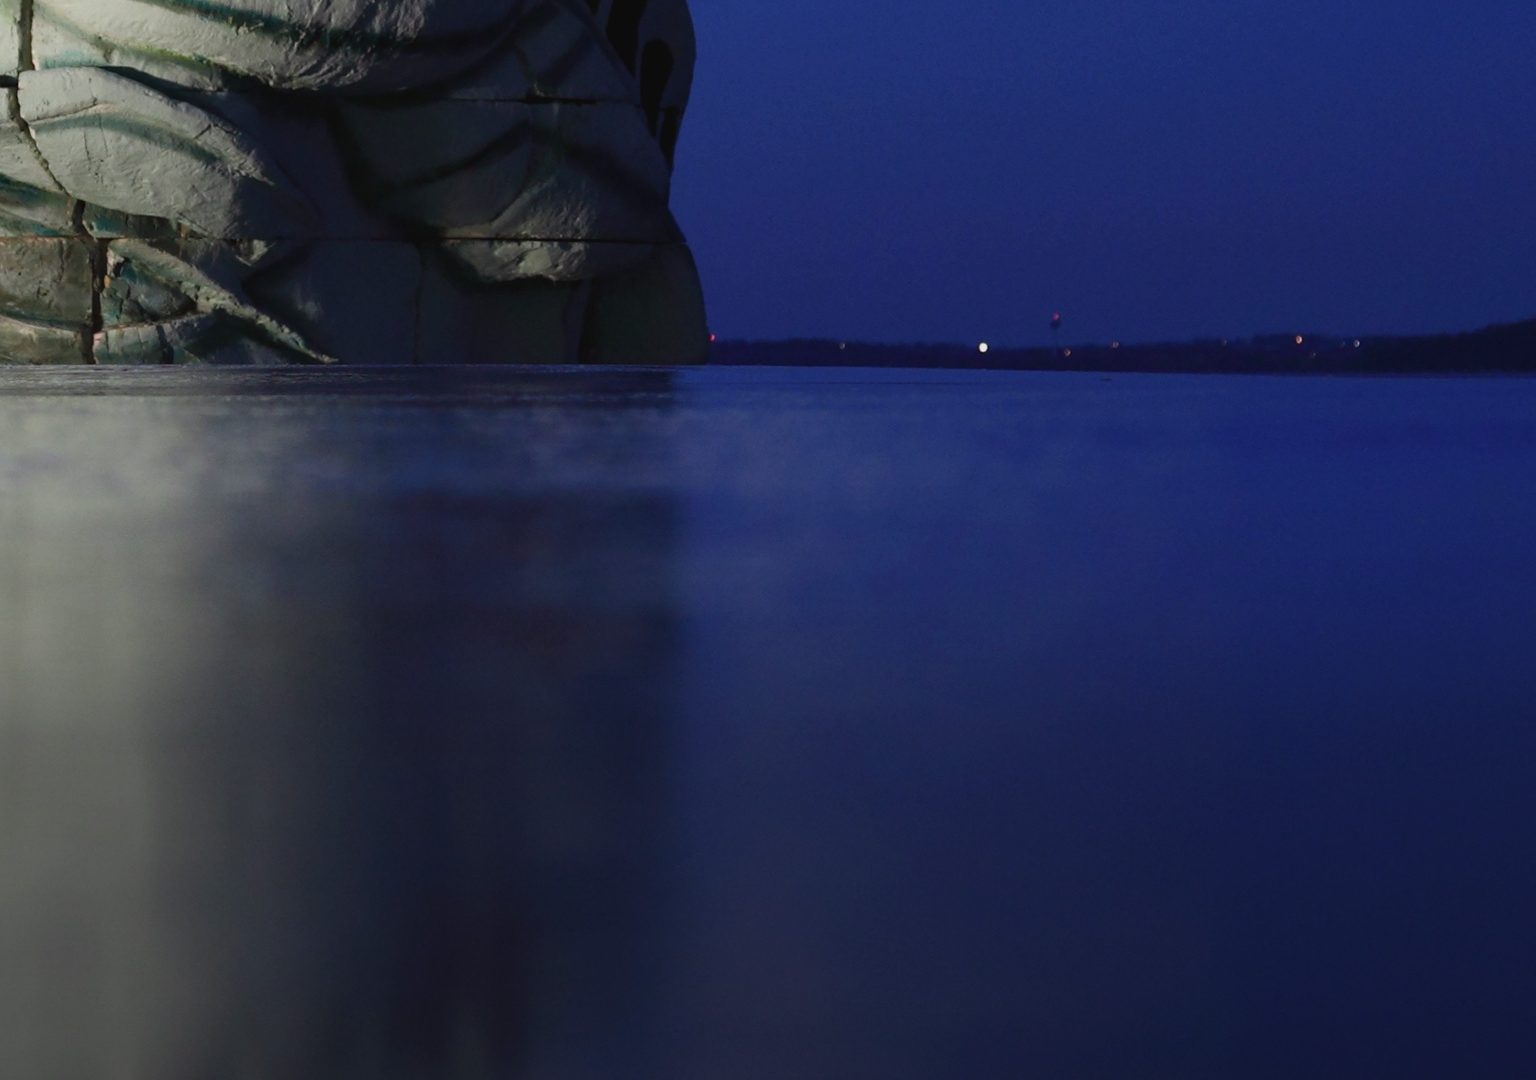 Replica of the top of the head of Statue of Liberty sits atop a frozen lake at night